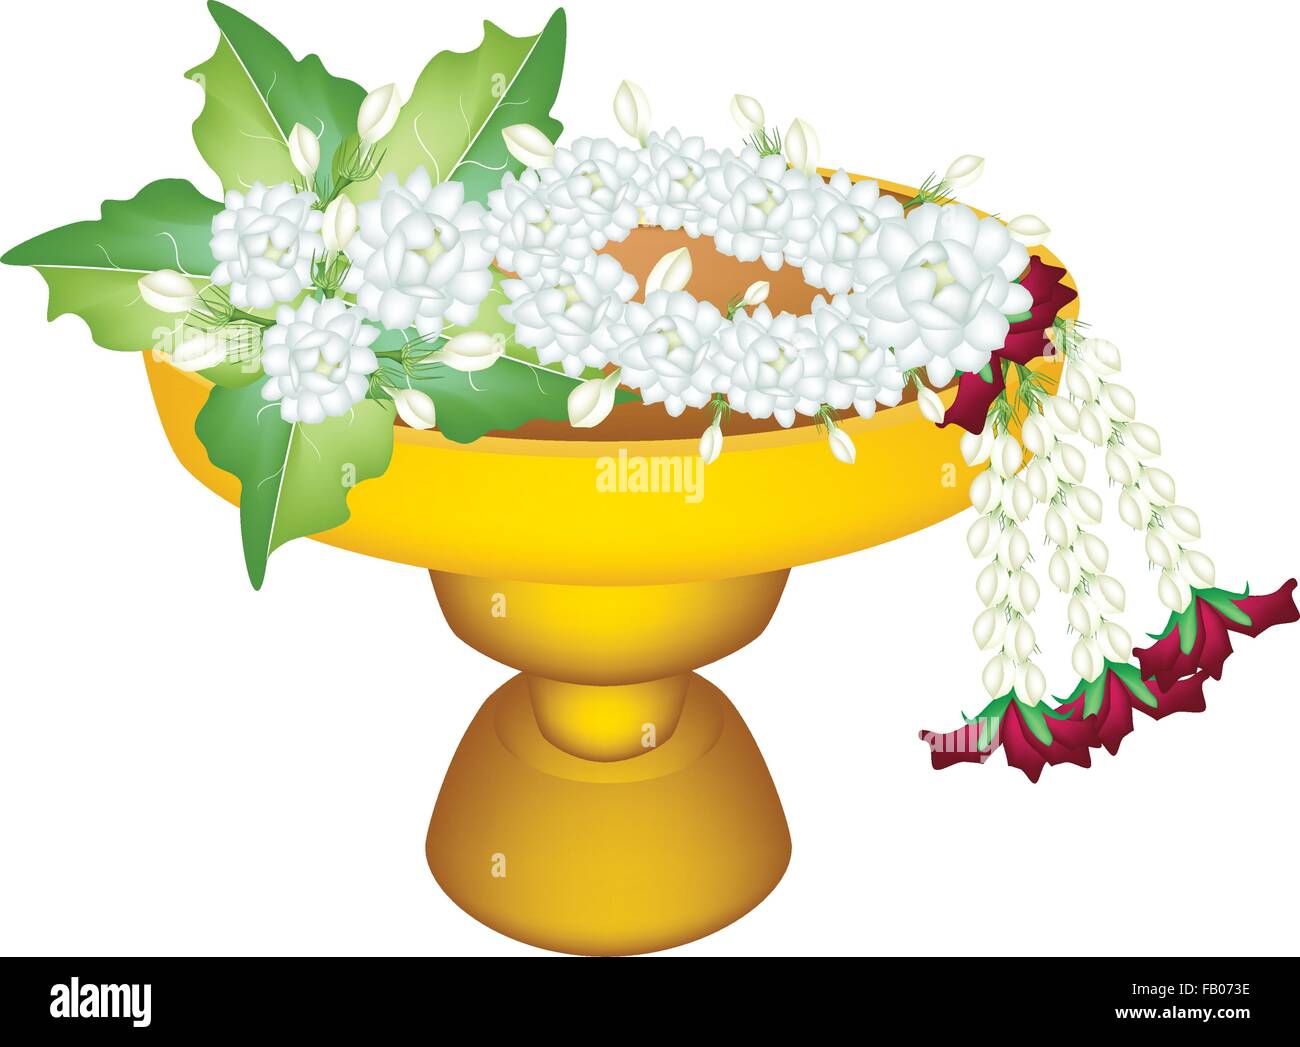 An Illustration of Beautiful Jasmine with Jasmine Garland with Roses Blossoms on Golden Tray with Pedestal, The Garland in Thai Stock Vector